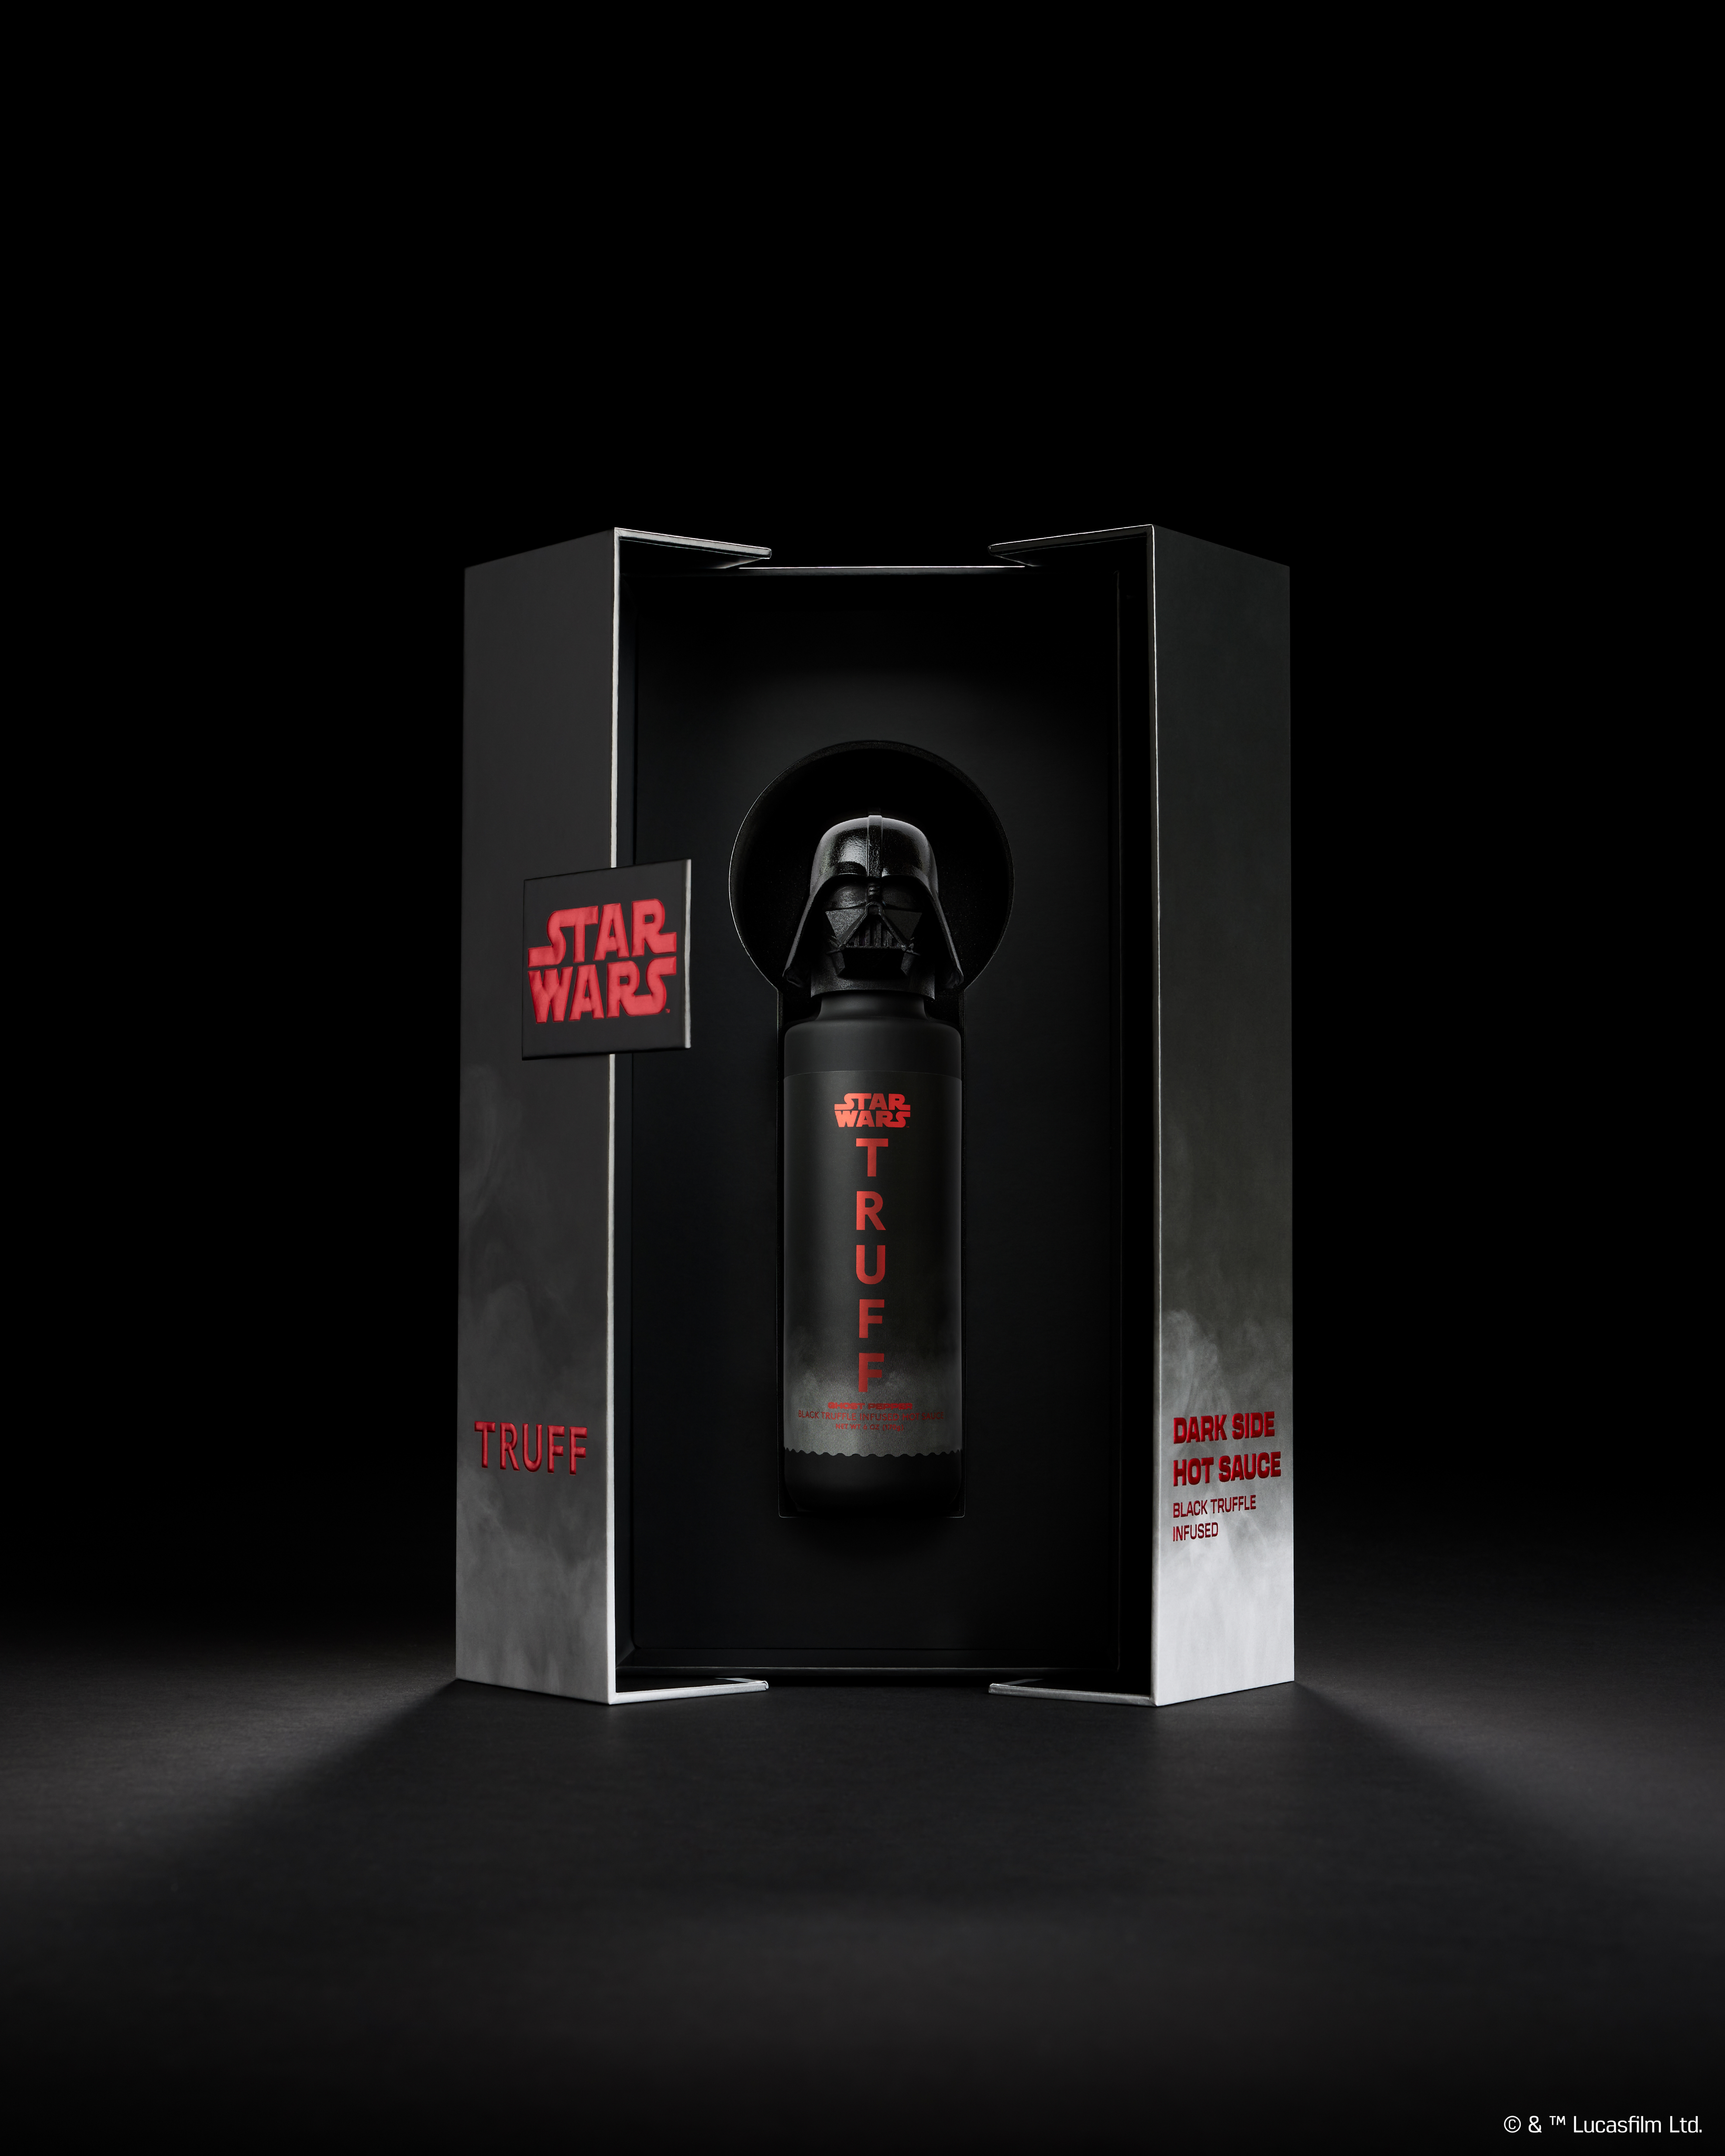 Star Wars-themed TRUFF hot sauce bottle with Darth Vader silhouette, packaged in a sleek black box